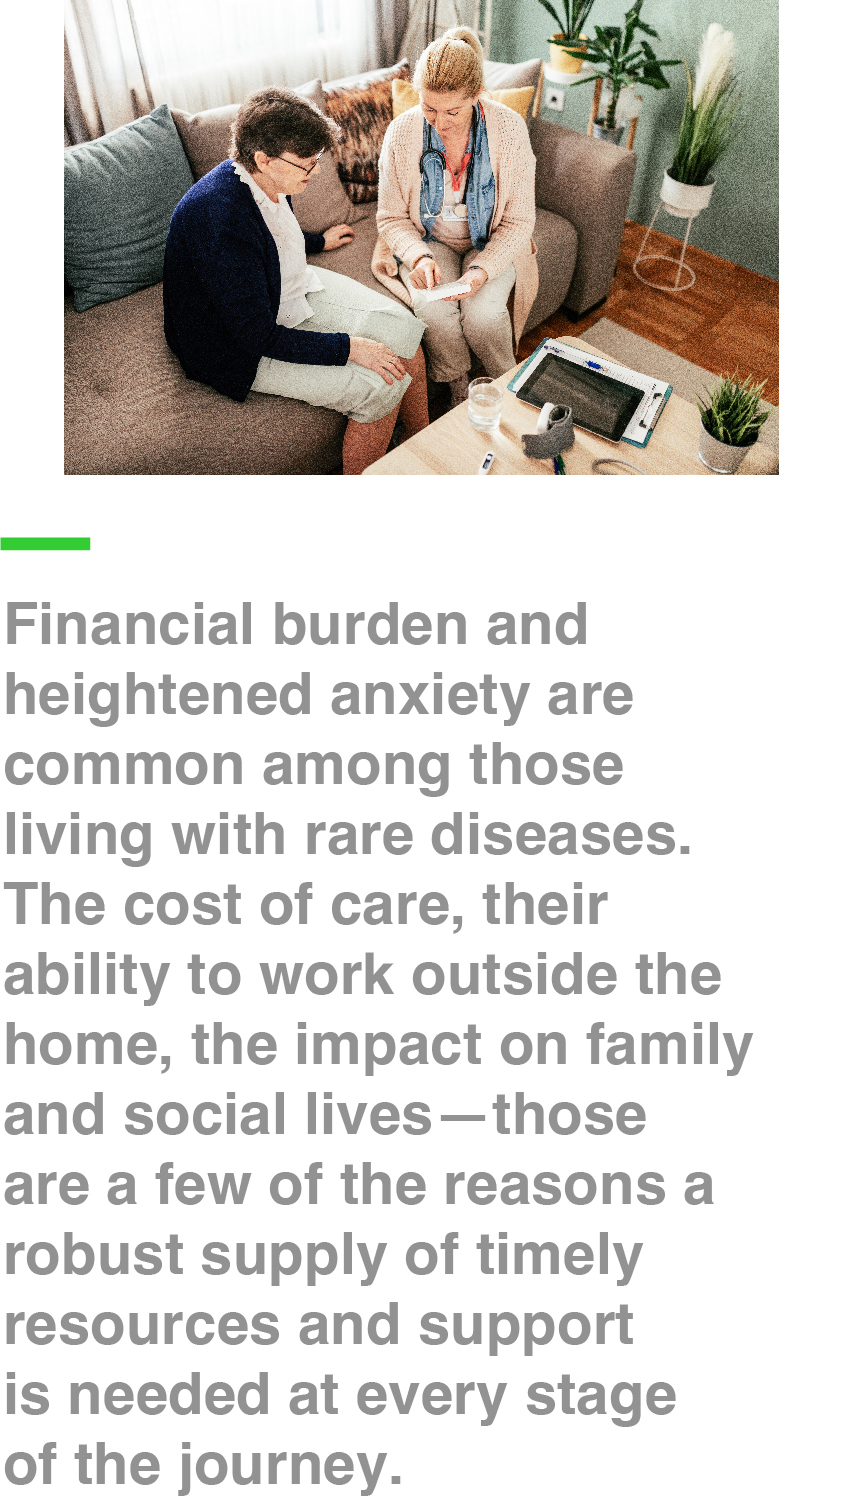 Financial burden and heightened anxiety are common among those living with rare diseases. The cost of care, their ability to work outside the home, the impact on family and social lives—those are a few of the reasons a robust supply of timely resources and support is needed at every stage of the journey.